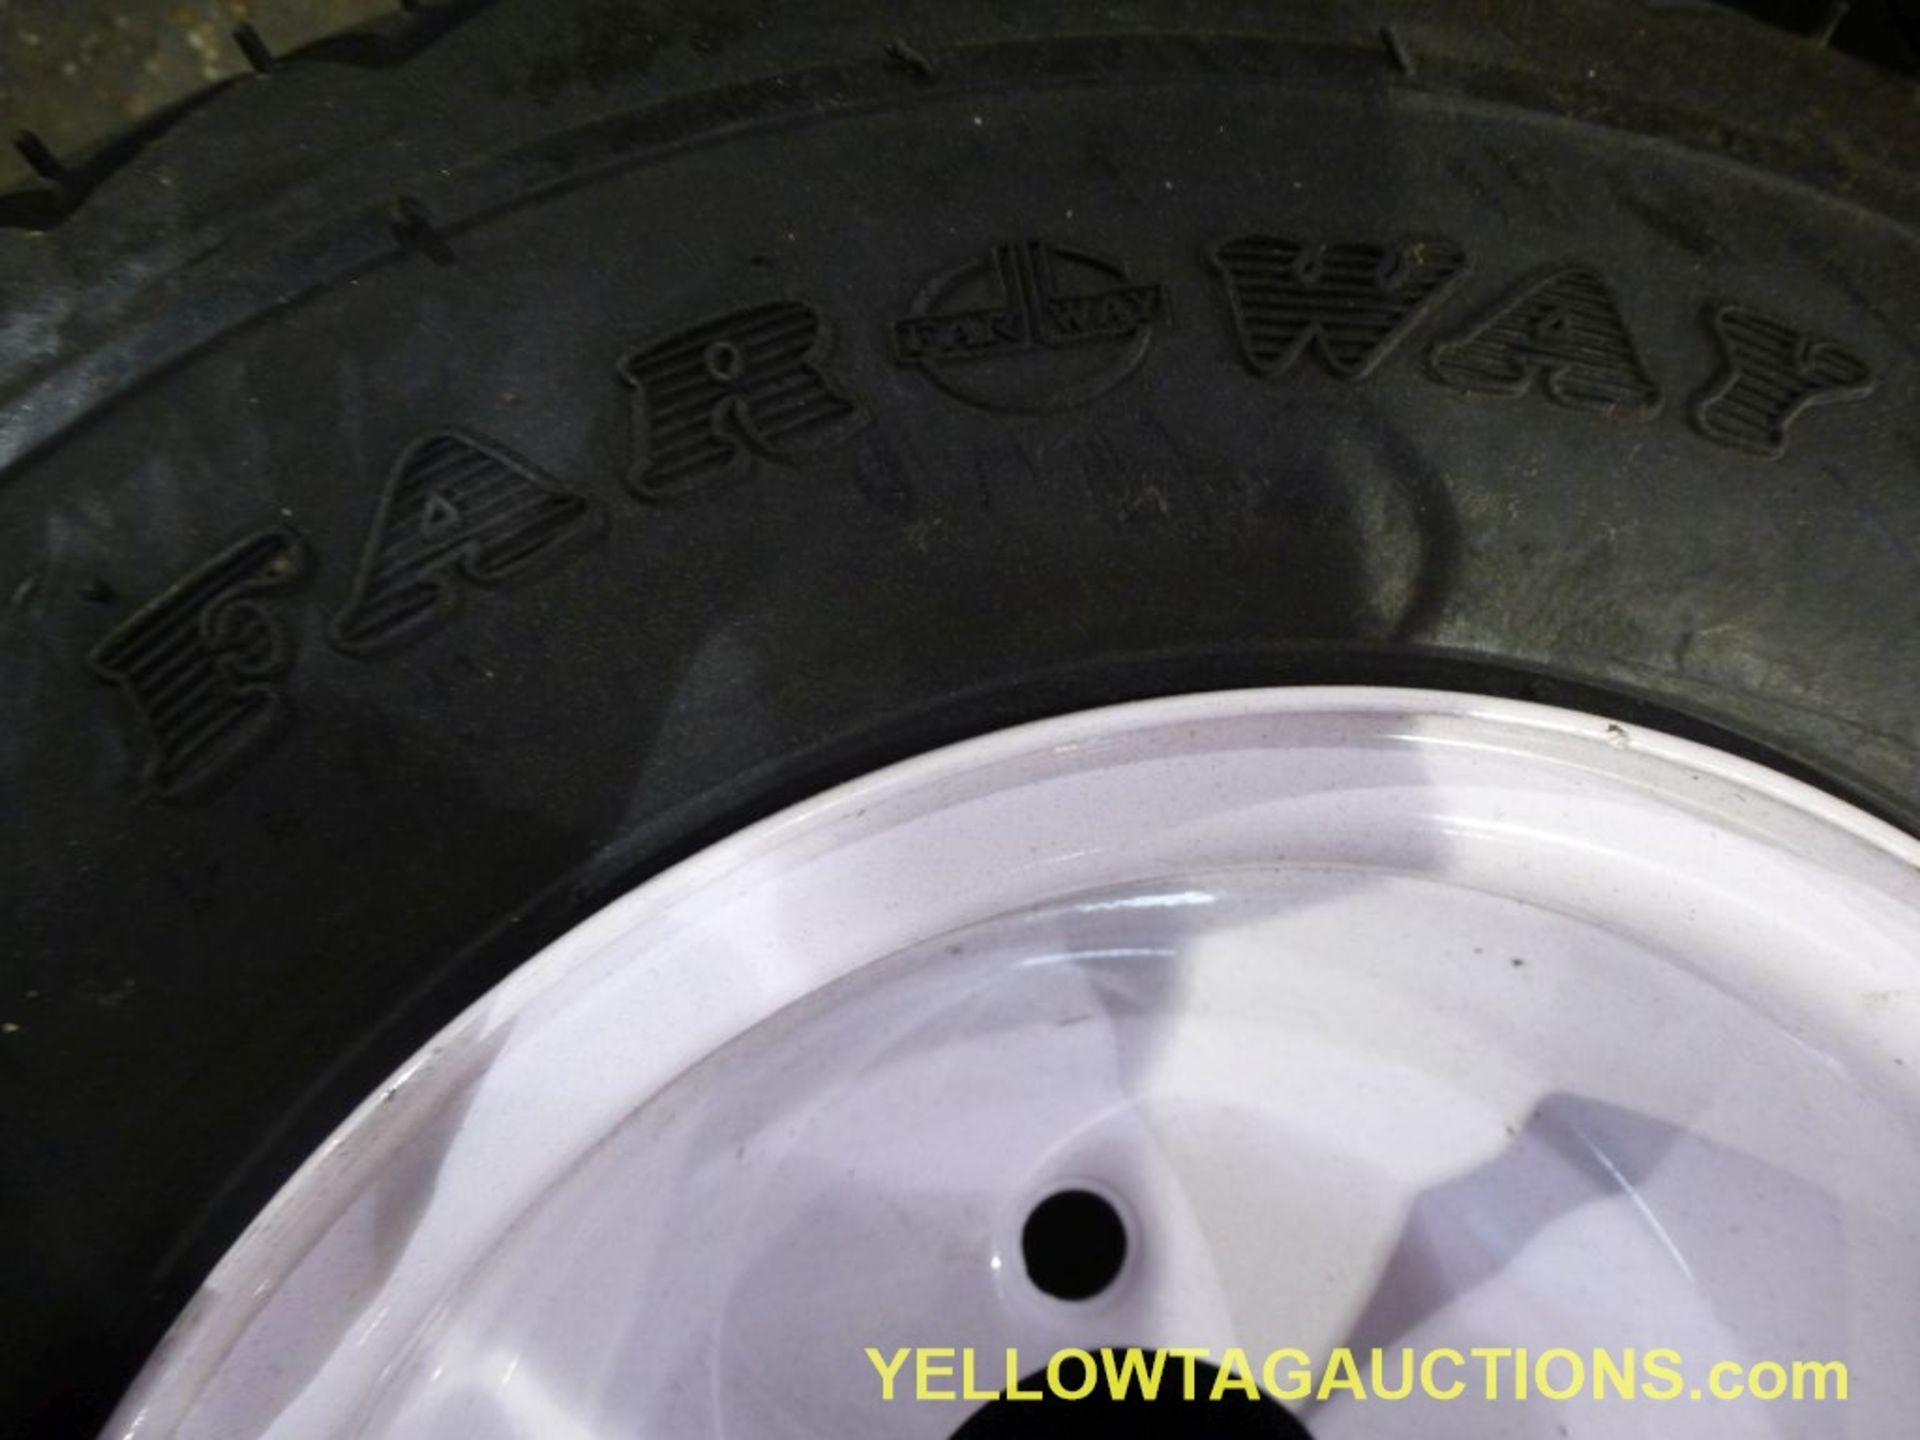 Lot of (12) FarWay 6-Ply Nylon Tires & Wheels|18 X 8.50 - 8NHS|Tag: 439 - Image 3 of 8